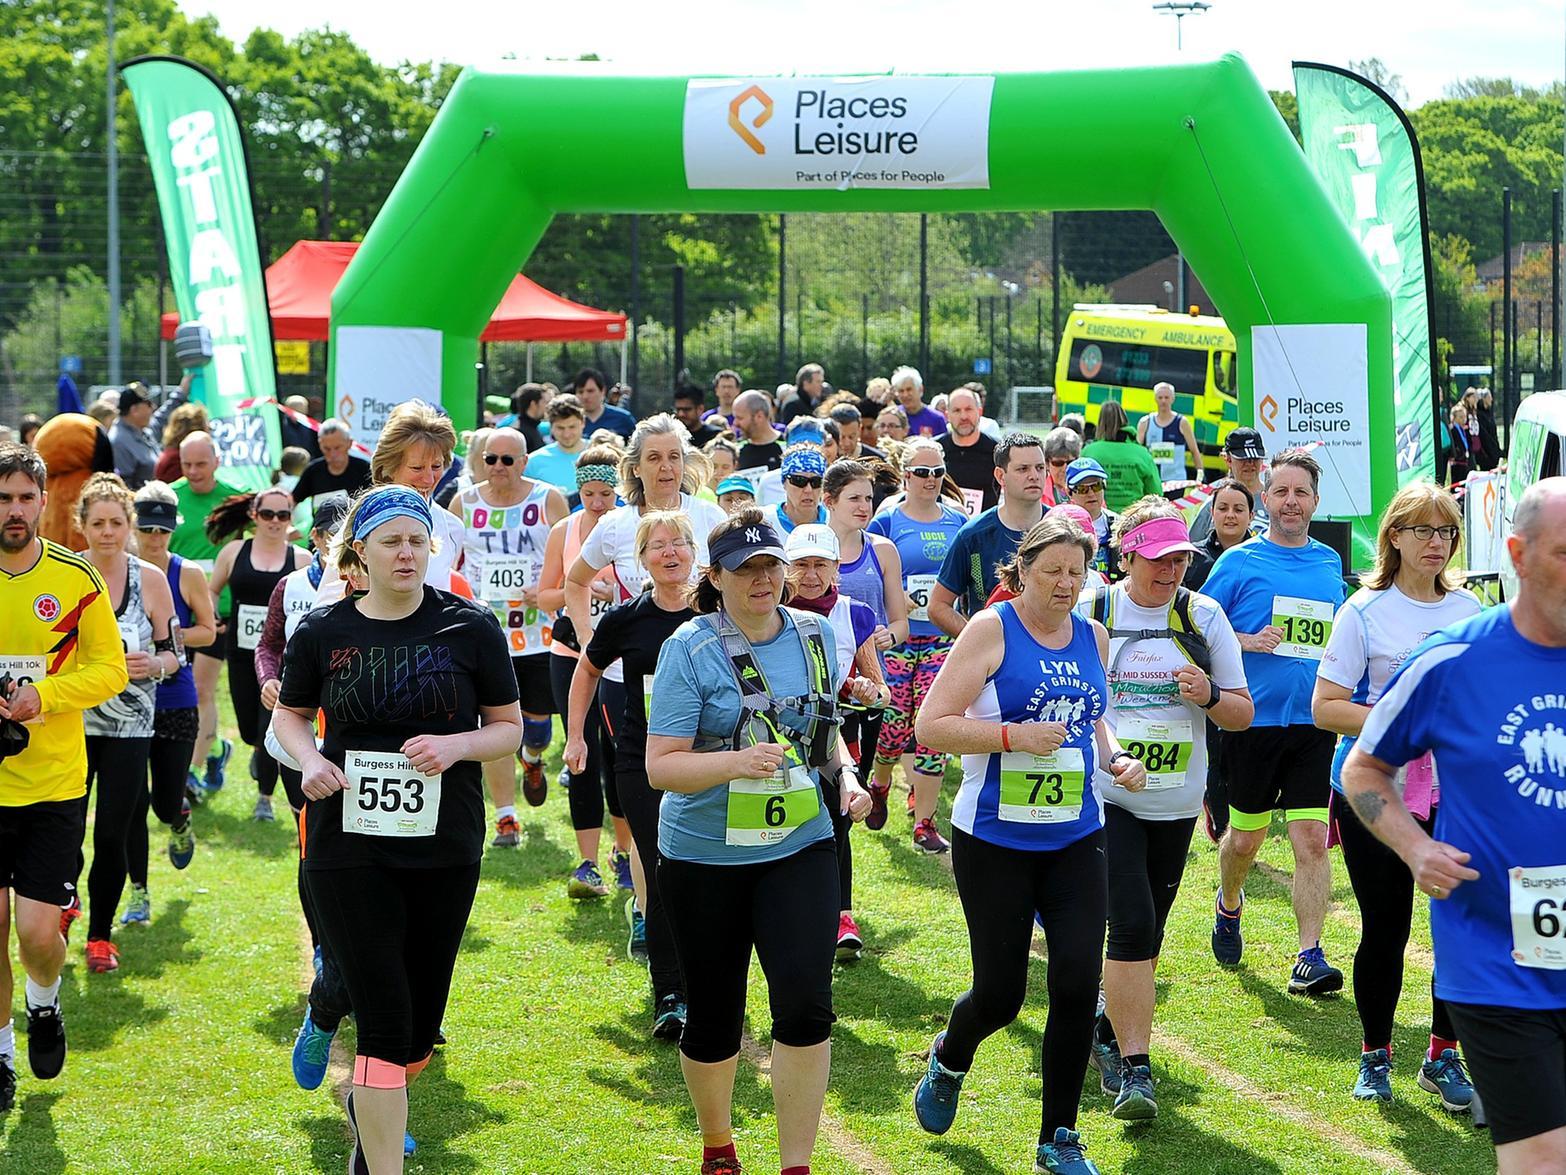 Mid Sussex Marathon Weekend is set to take place from Saturday, May 23 to Monday, May 25.Organiser say they are 'the only event to bring the three towns of Mid Sussex  East Grinstead, Haywards Heath and Burgess Hill'. 

More than 1,600 runners took part in 2019, and this year there will be the option of a half-marathon.

The new Mid Sussex half marathon event will include a five mile race in East Grinstead, a five mile race in Haywards Heath and a five kilometre race in Burgess Hill. Just like the full marathon, you can run one, two or run all three races to cover the distance of a half marathon.

The Mid Sussex Marathon, offering three races  two ten mile races in both East Grinstead and Haywards Heath, and the ten kilometre in Burgess Hill. All three combine to cover a total of 26.2 miles  the distance of a marathon. Runners are are able to enter each race individually or complete all three.

Main Races start at 10.30am each day.